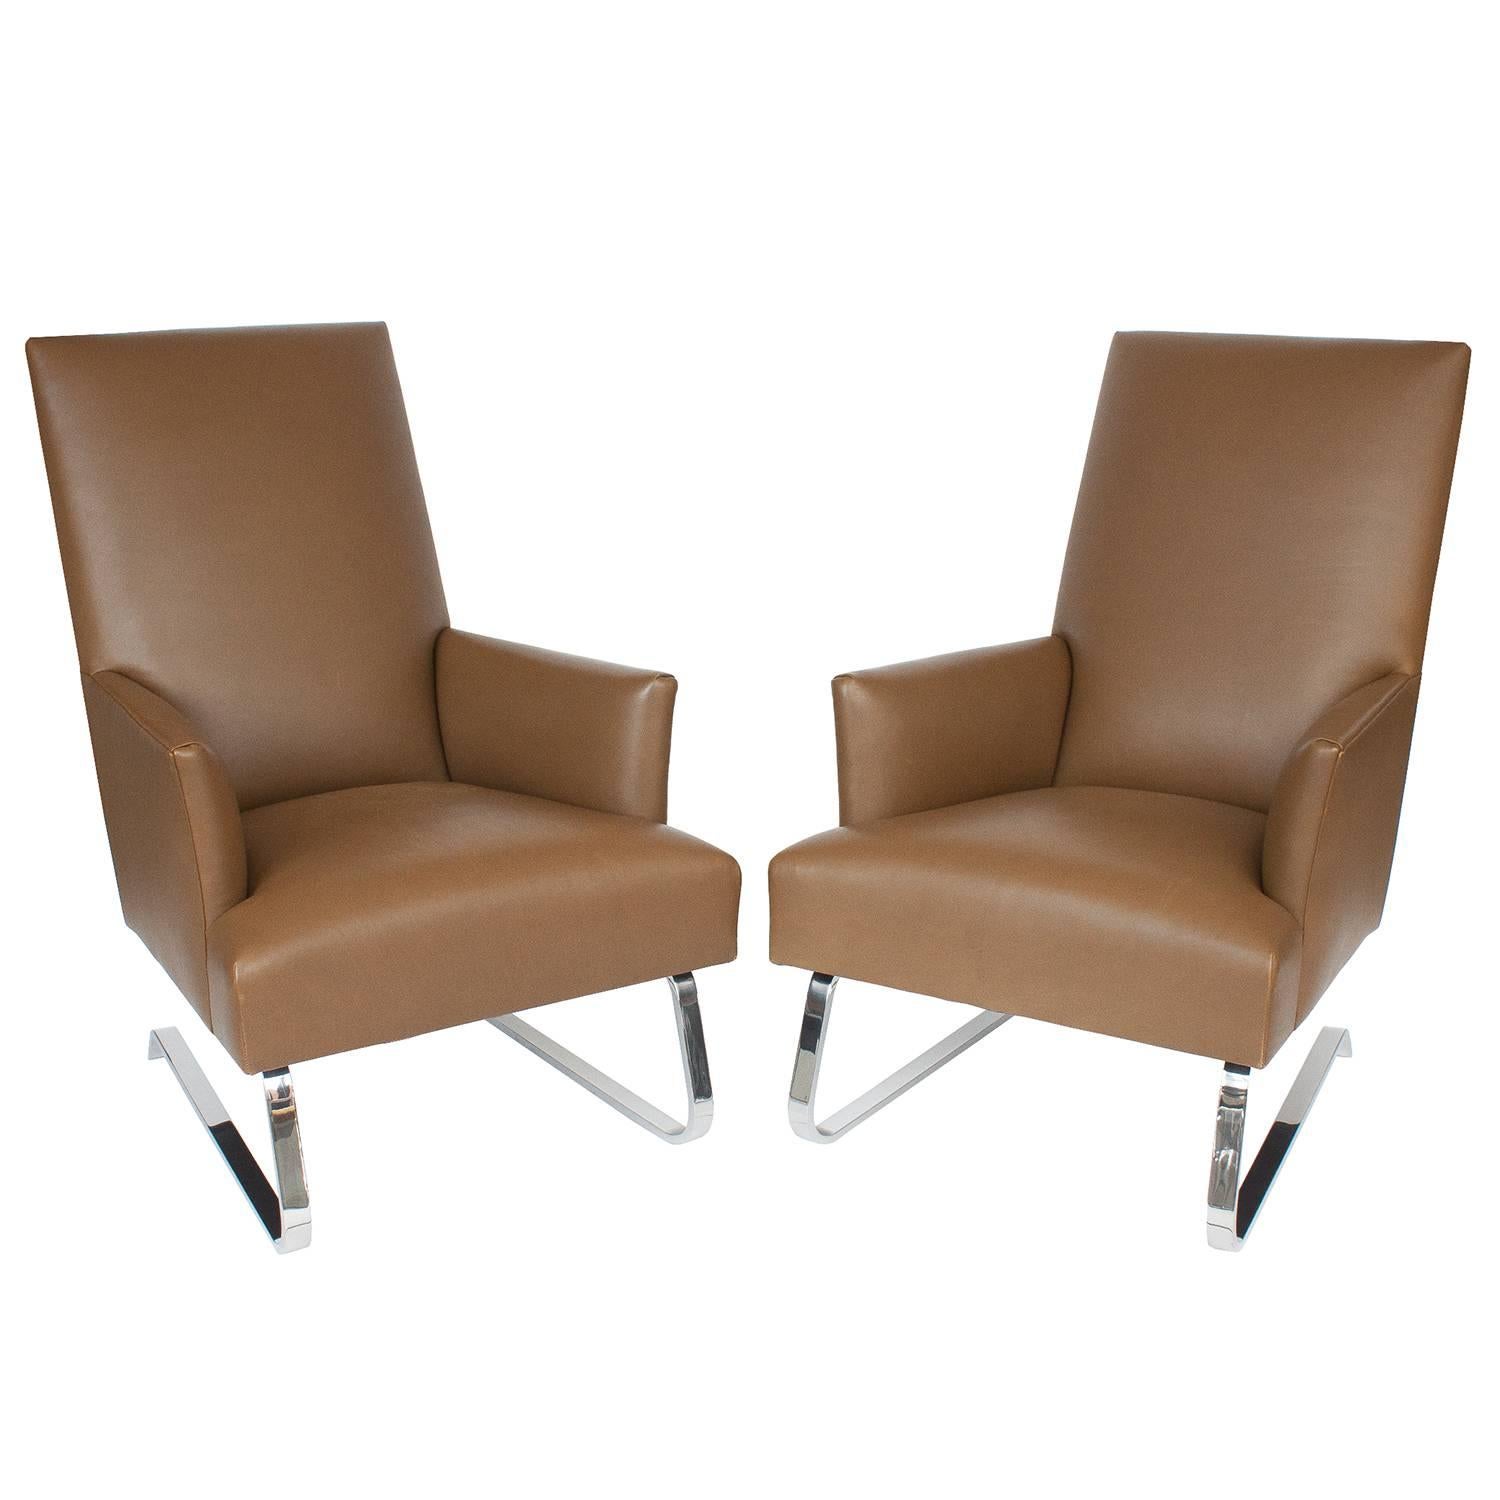 Pair of Donghia Leather Odeon Lounge Chairs